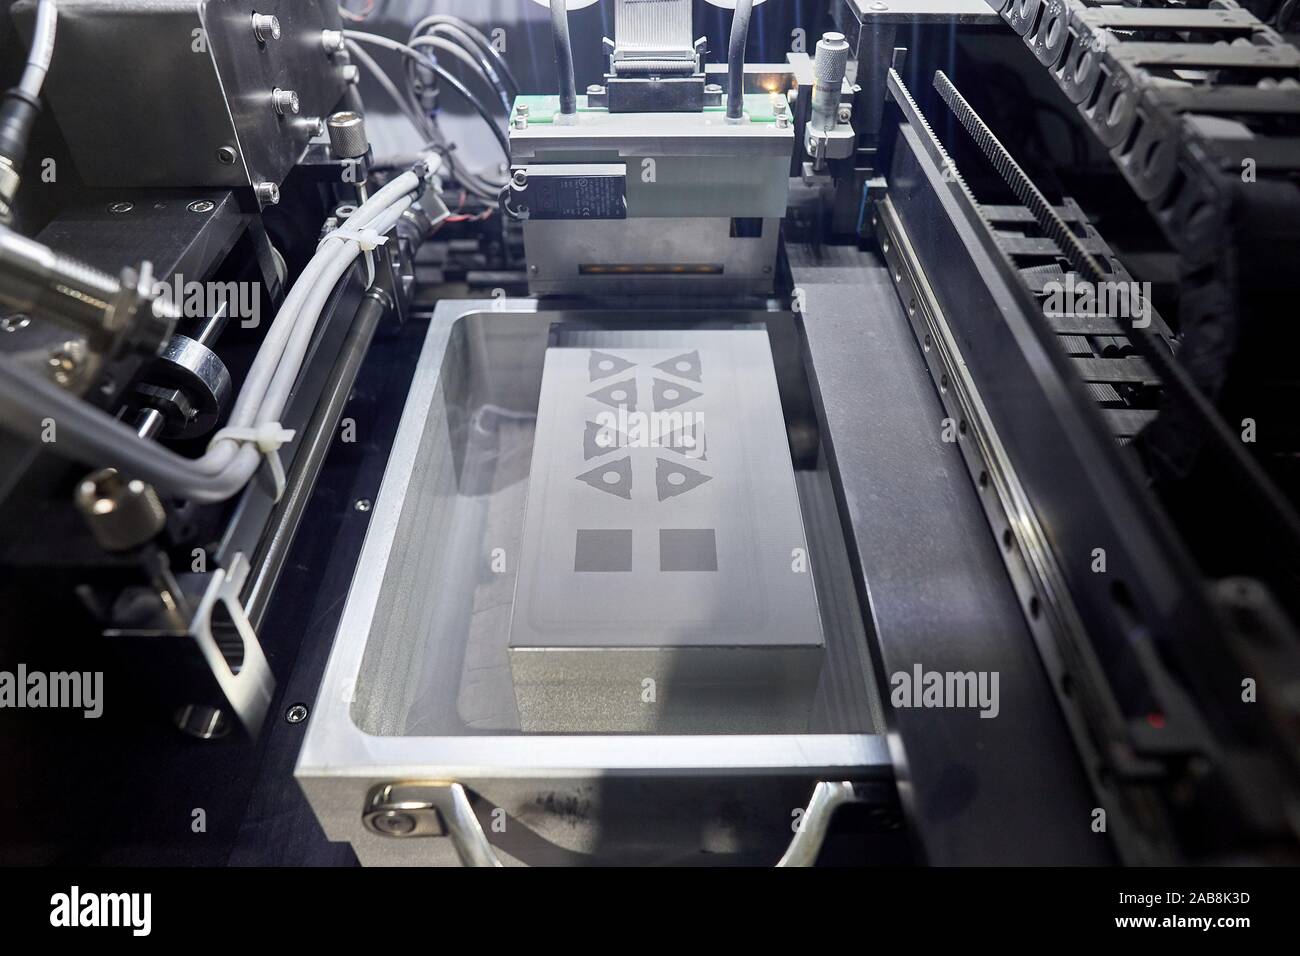 Binder Jetting, Additive manufacturing technology that allows high complexity parts to be manufactured, within a wide range of materials, by Stock Photo